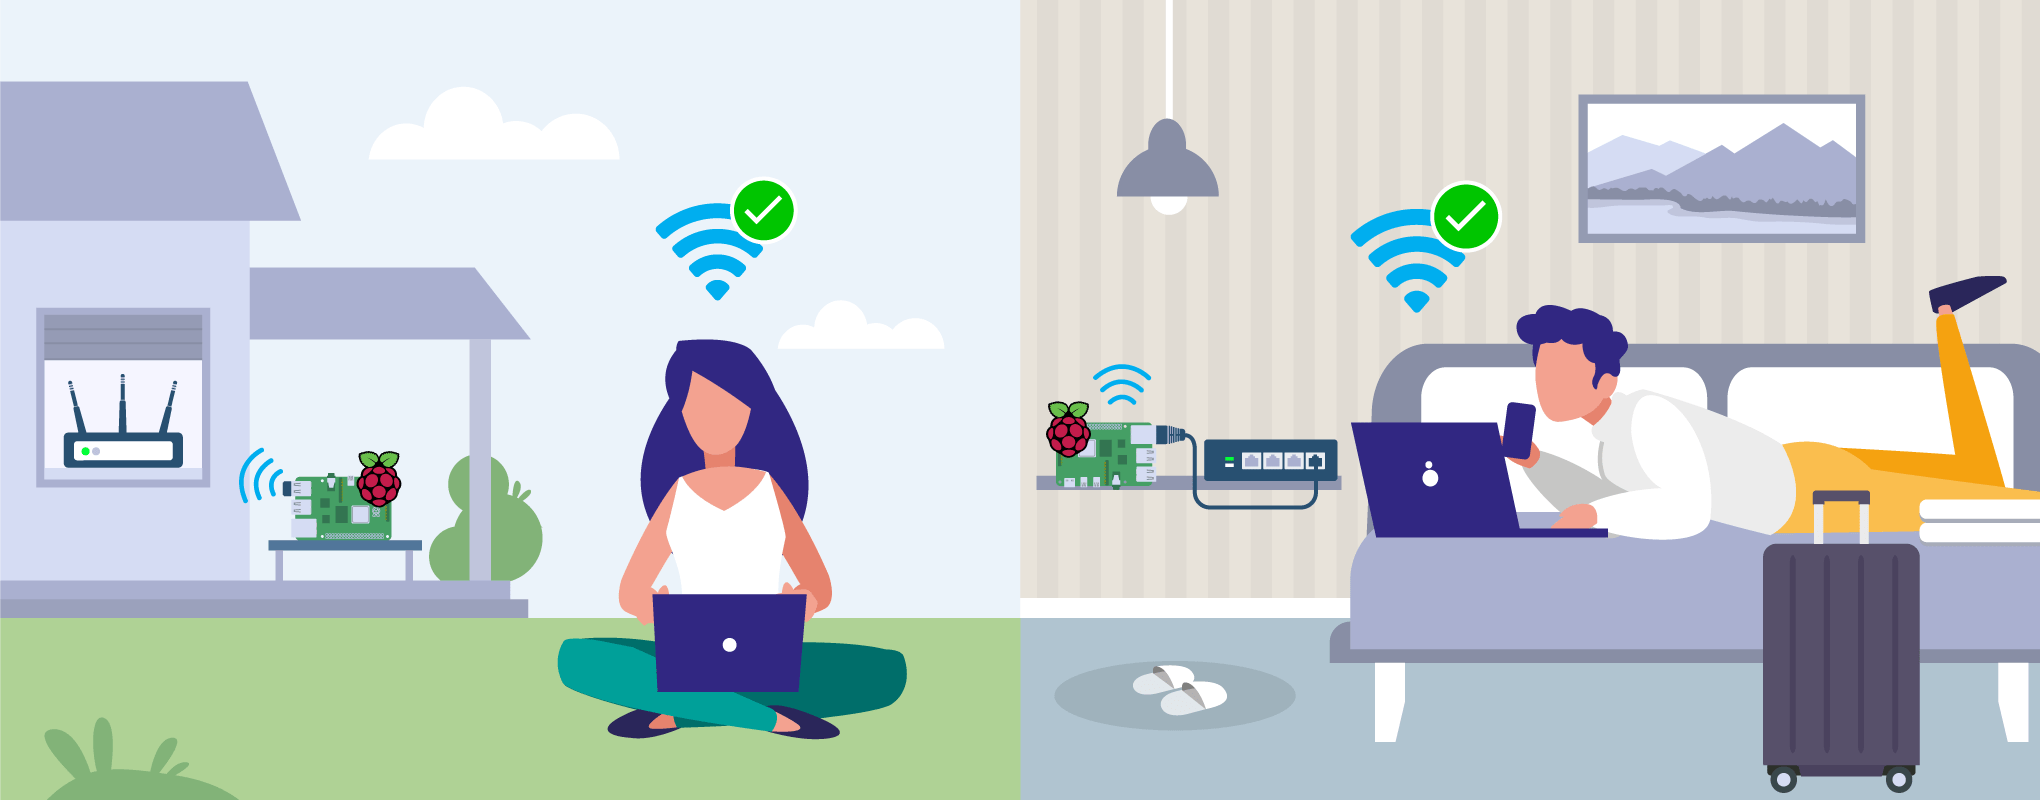 Extend Wi-Fi coverage with this project